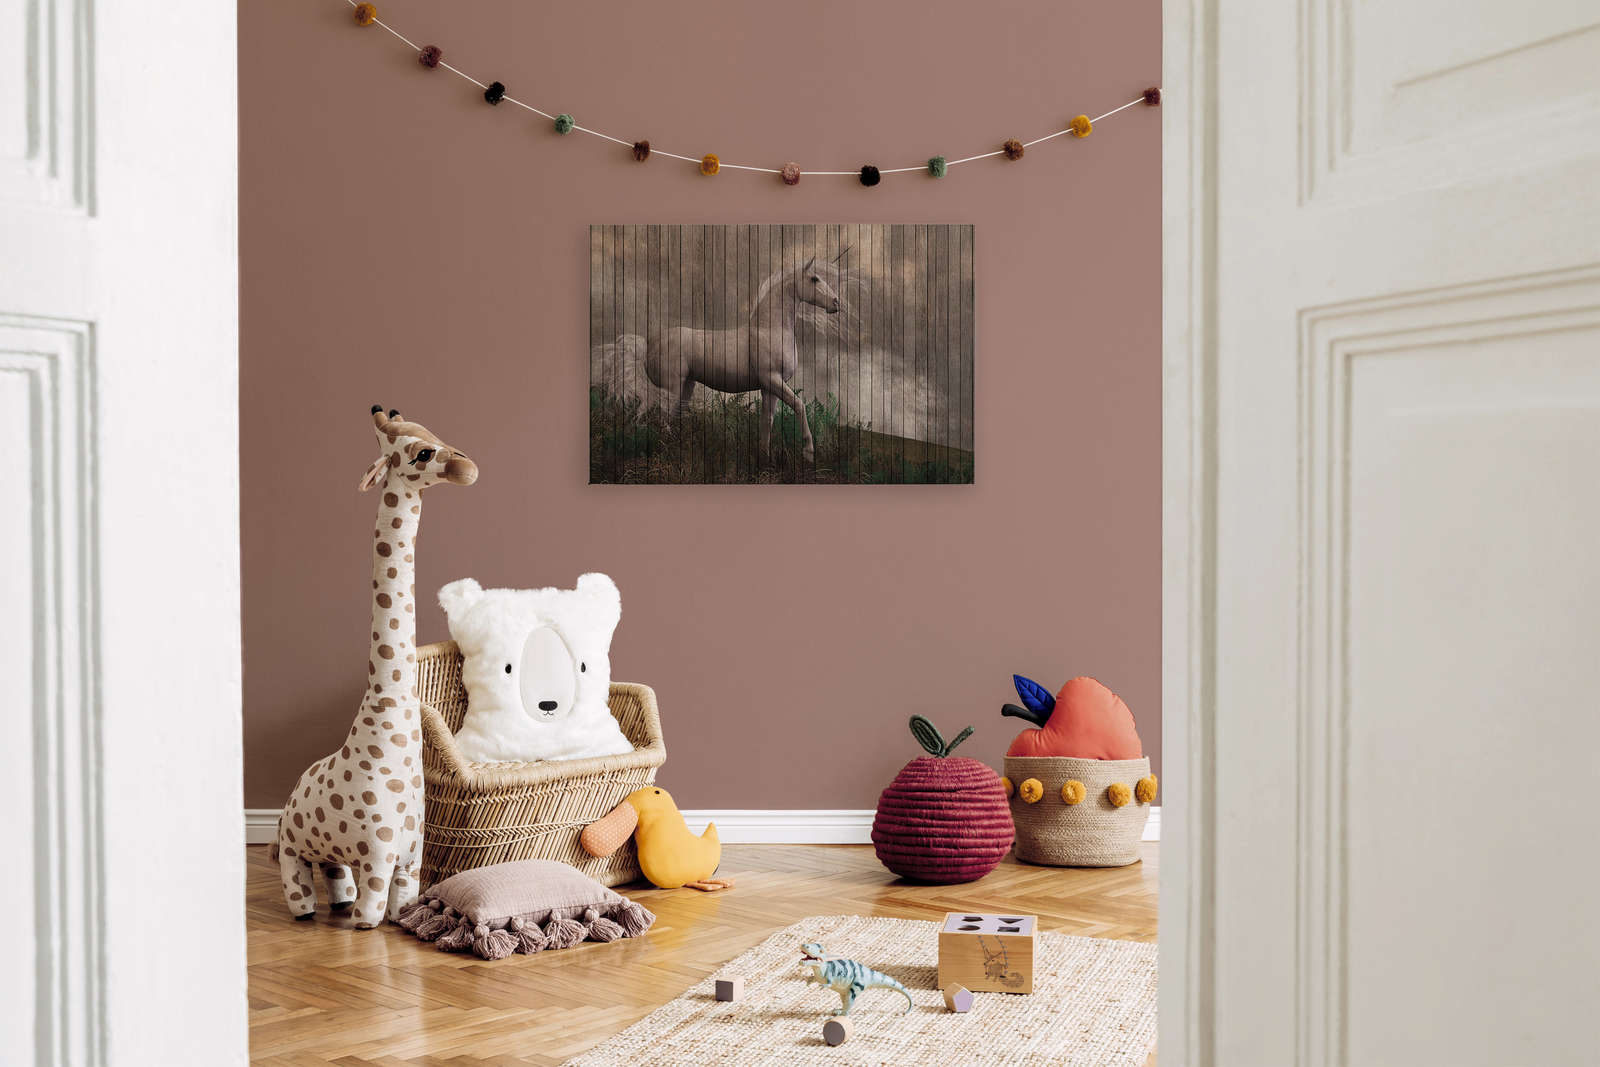             Fantasy 3 - Unicorn canvas picture with wooden board look - 0.90 m x 0.60 m
        